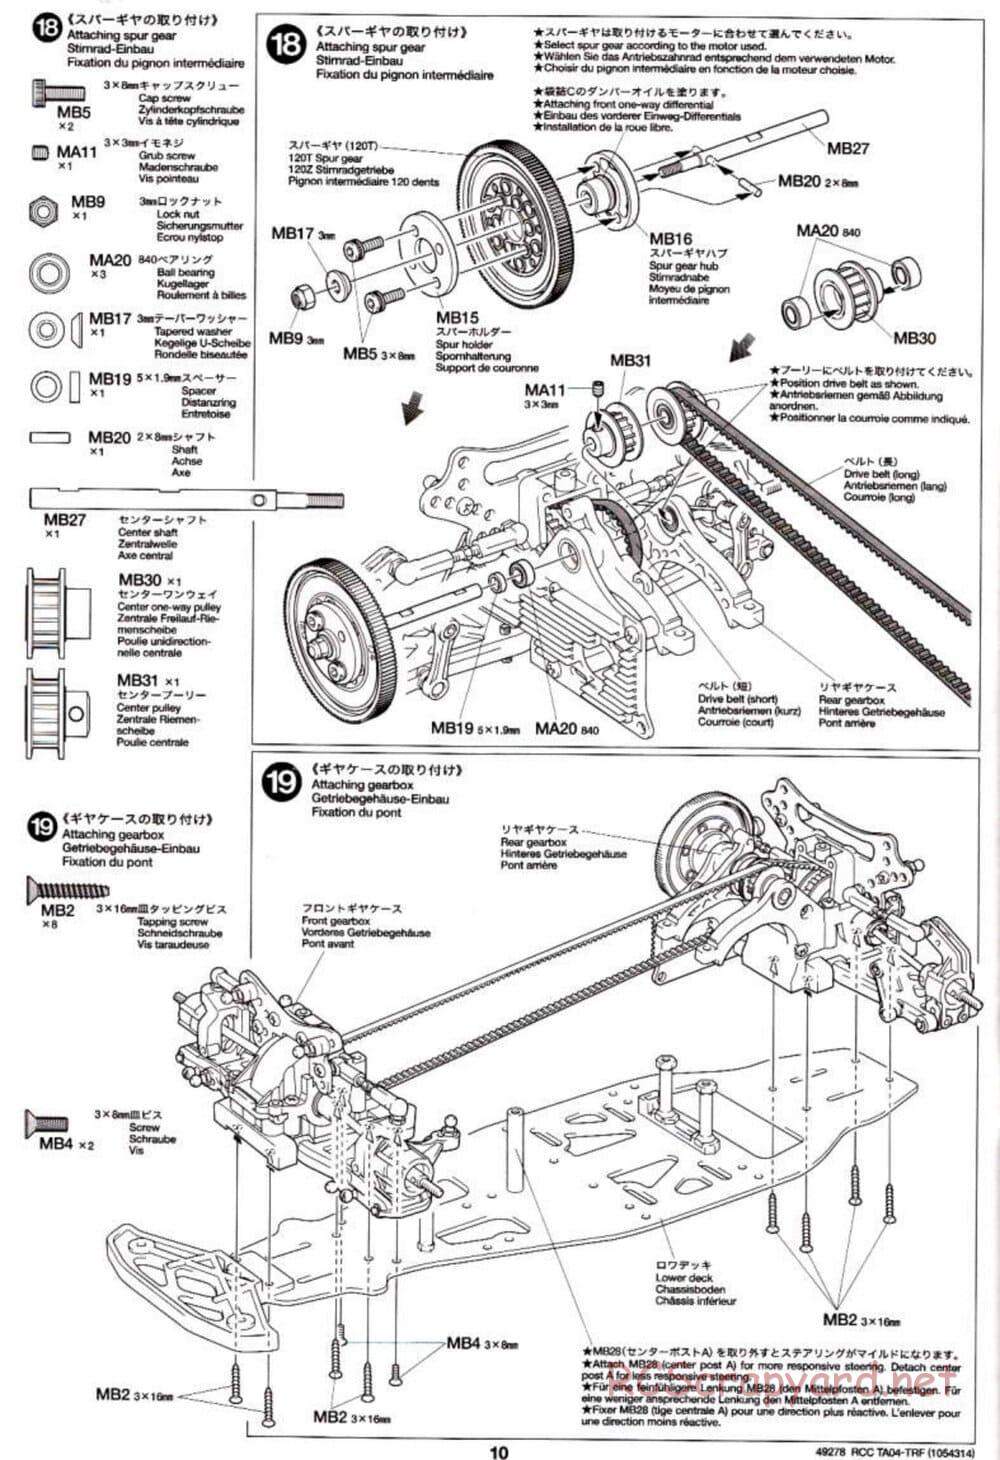 Tamiya - TA-04 TRF Special Chassis Chassis - Manual - Page 10